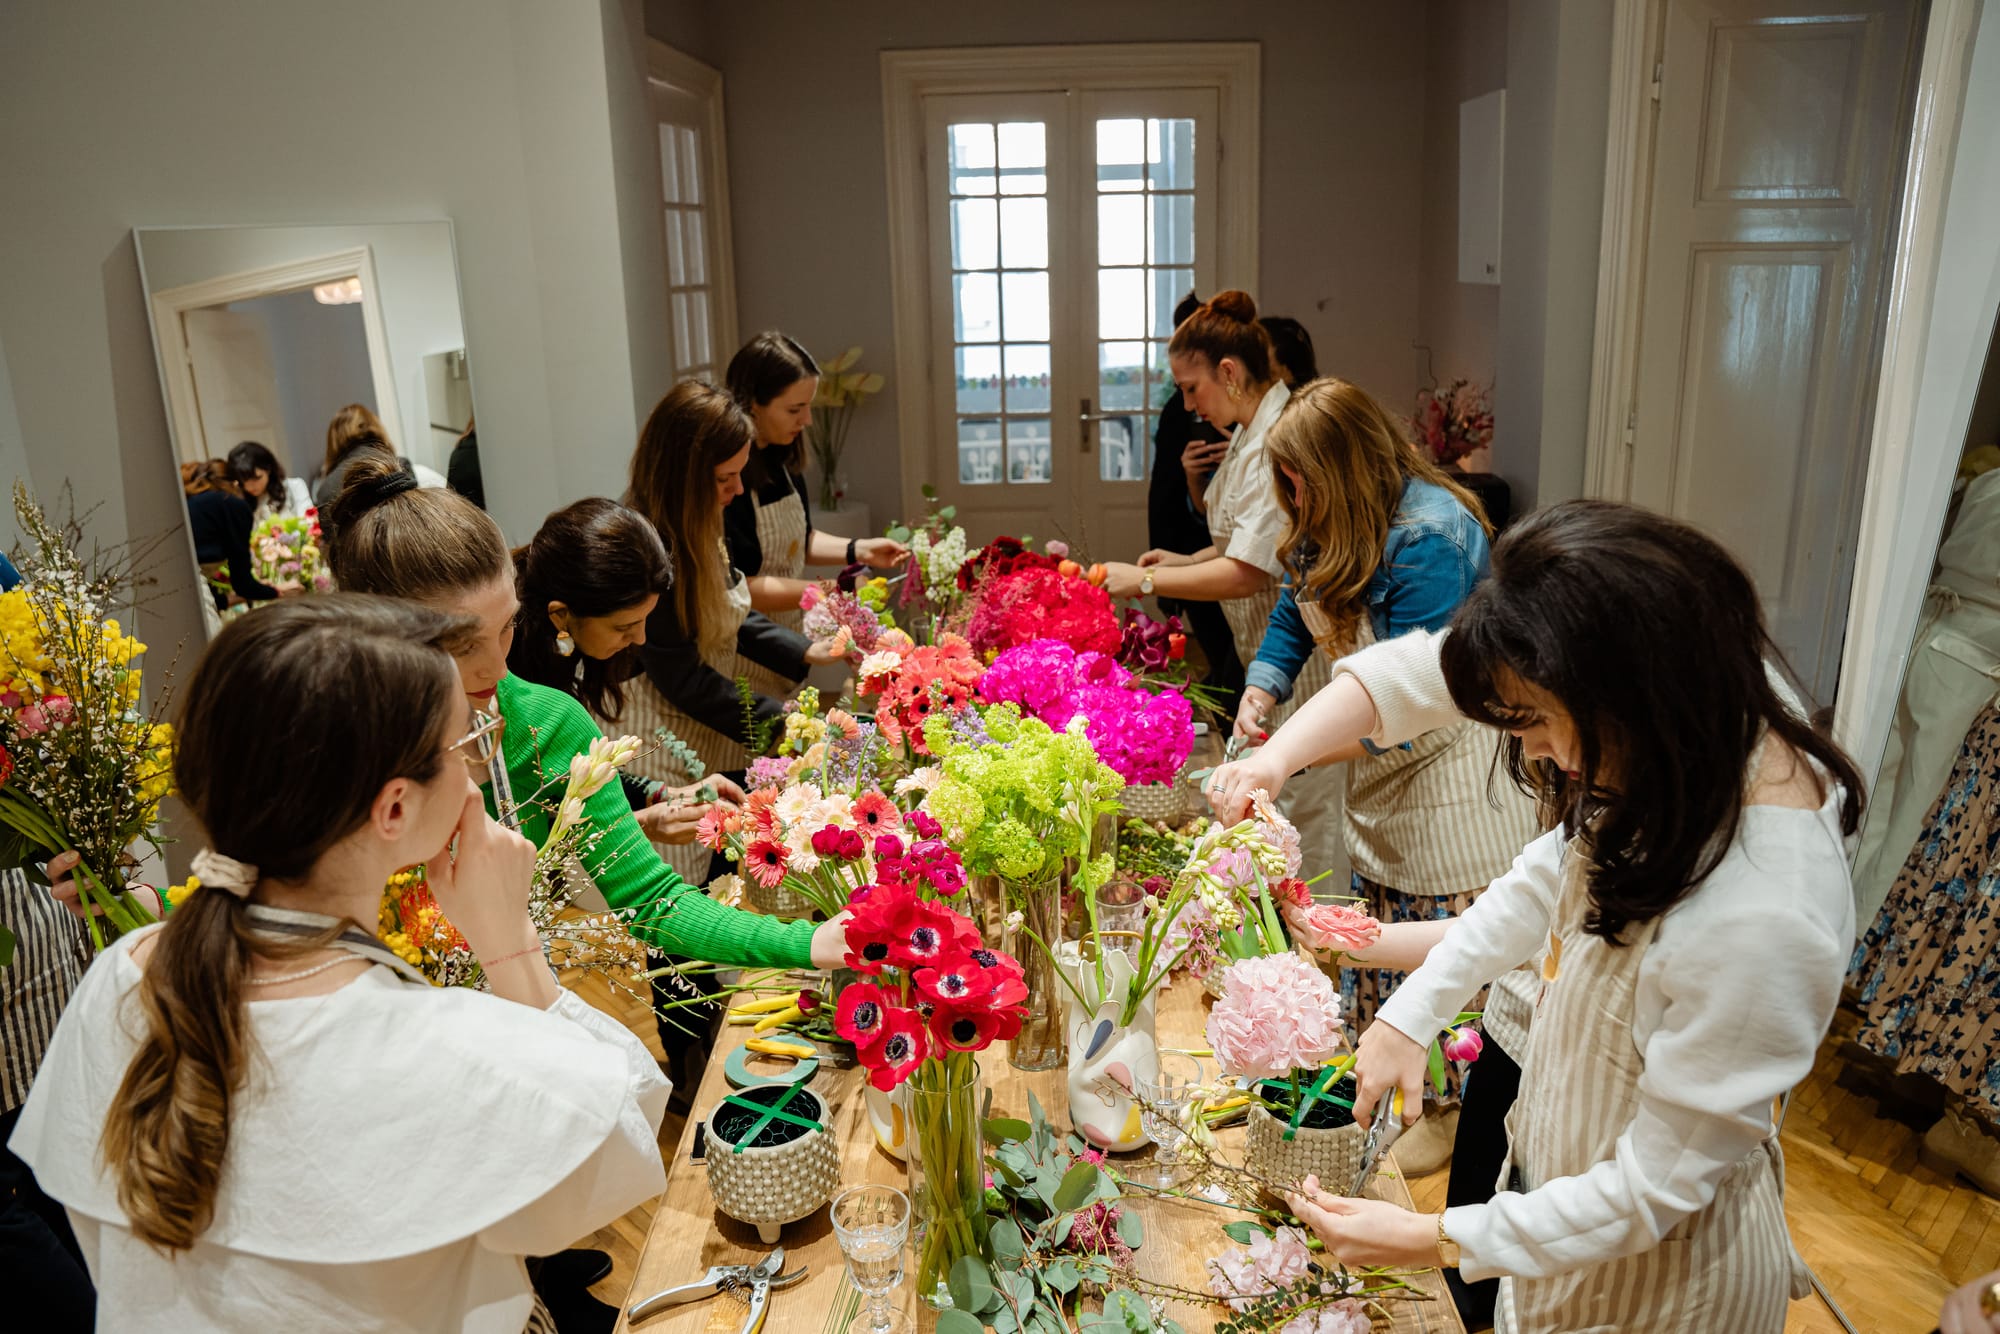 The Blooming After 30s Flower Workshop was a blast